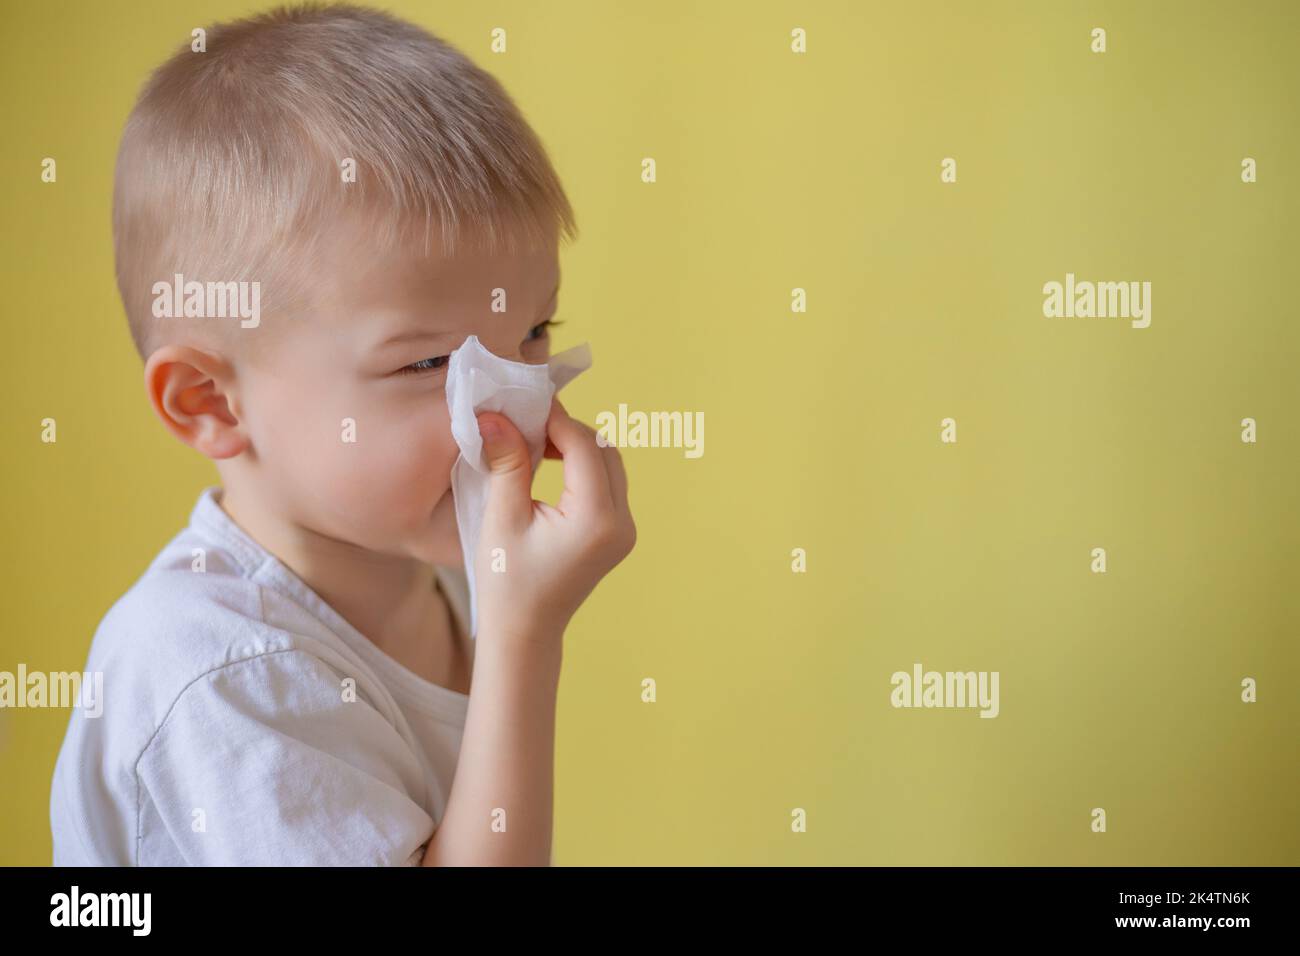 A child in a white T-shirt on a yellow background, blowing his nose. Sick child with napkin. Allergic kid, flu season. Kid with cold rhinitis, cold. L Stock Photo